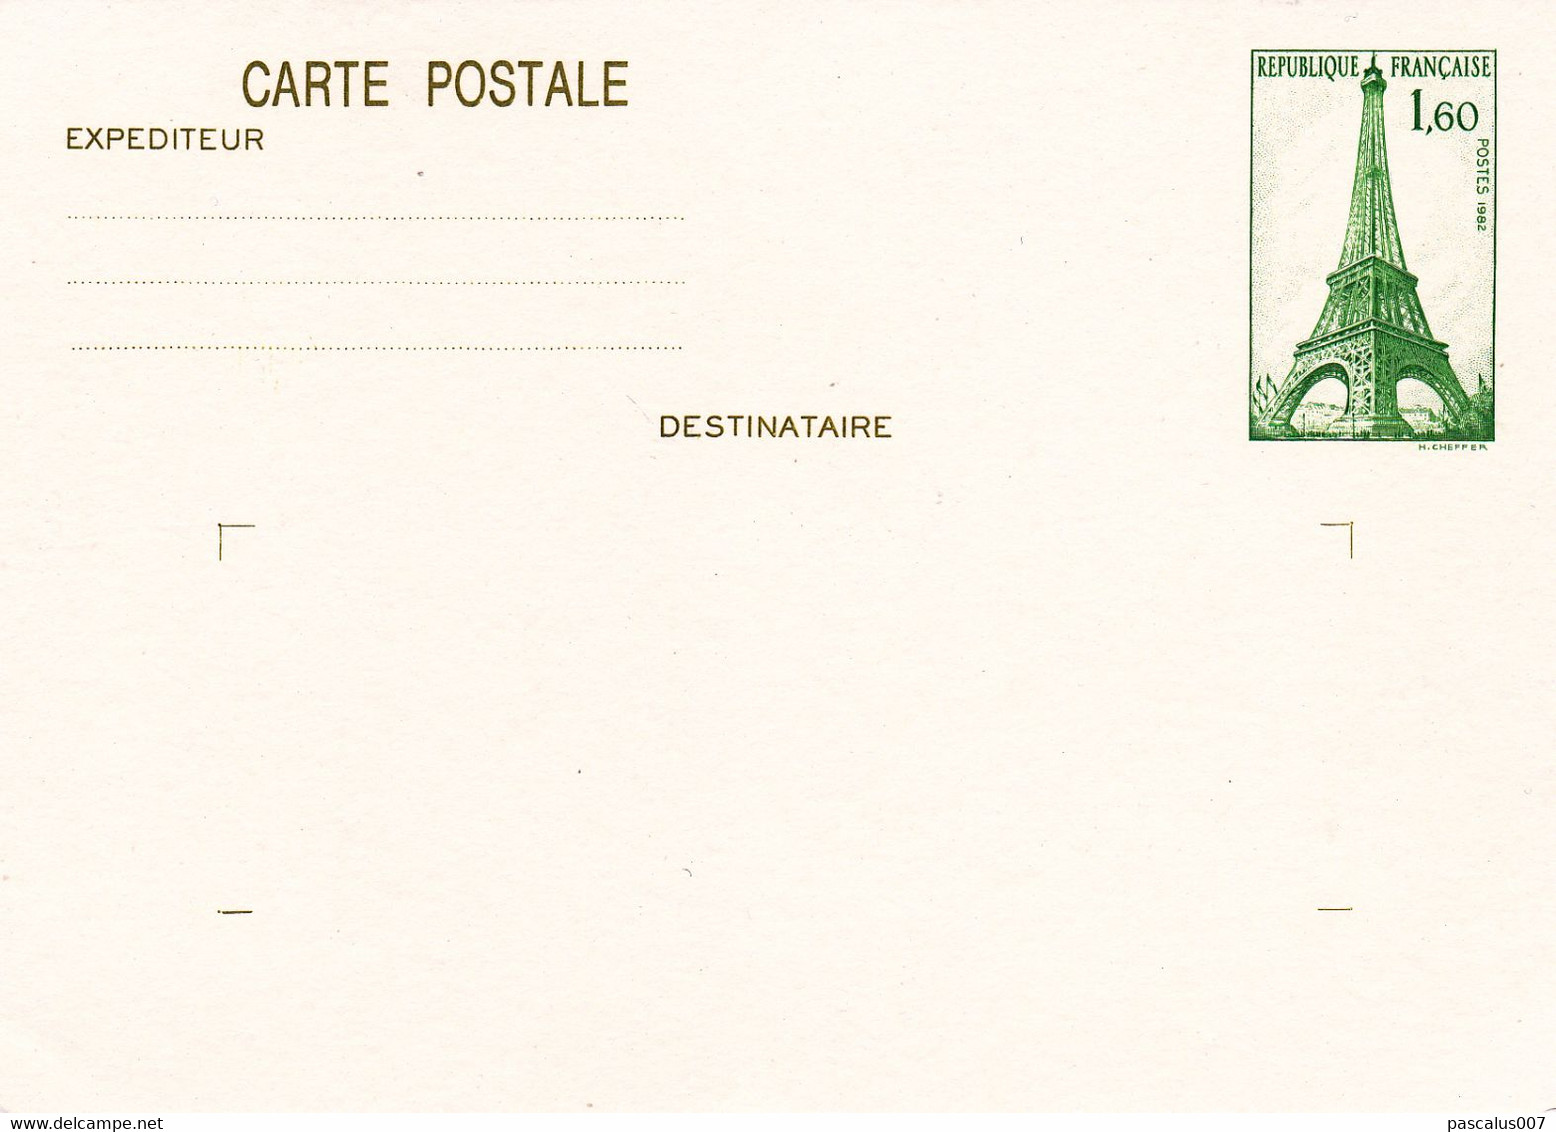 B01-373 3 Cartes Postales Entiers Postaux France 1982 Belgica Tour Eiffel - Collections & Lots: Stationery & PAP